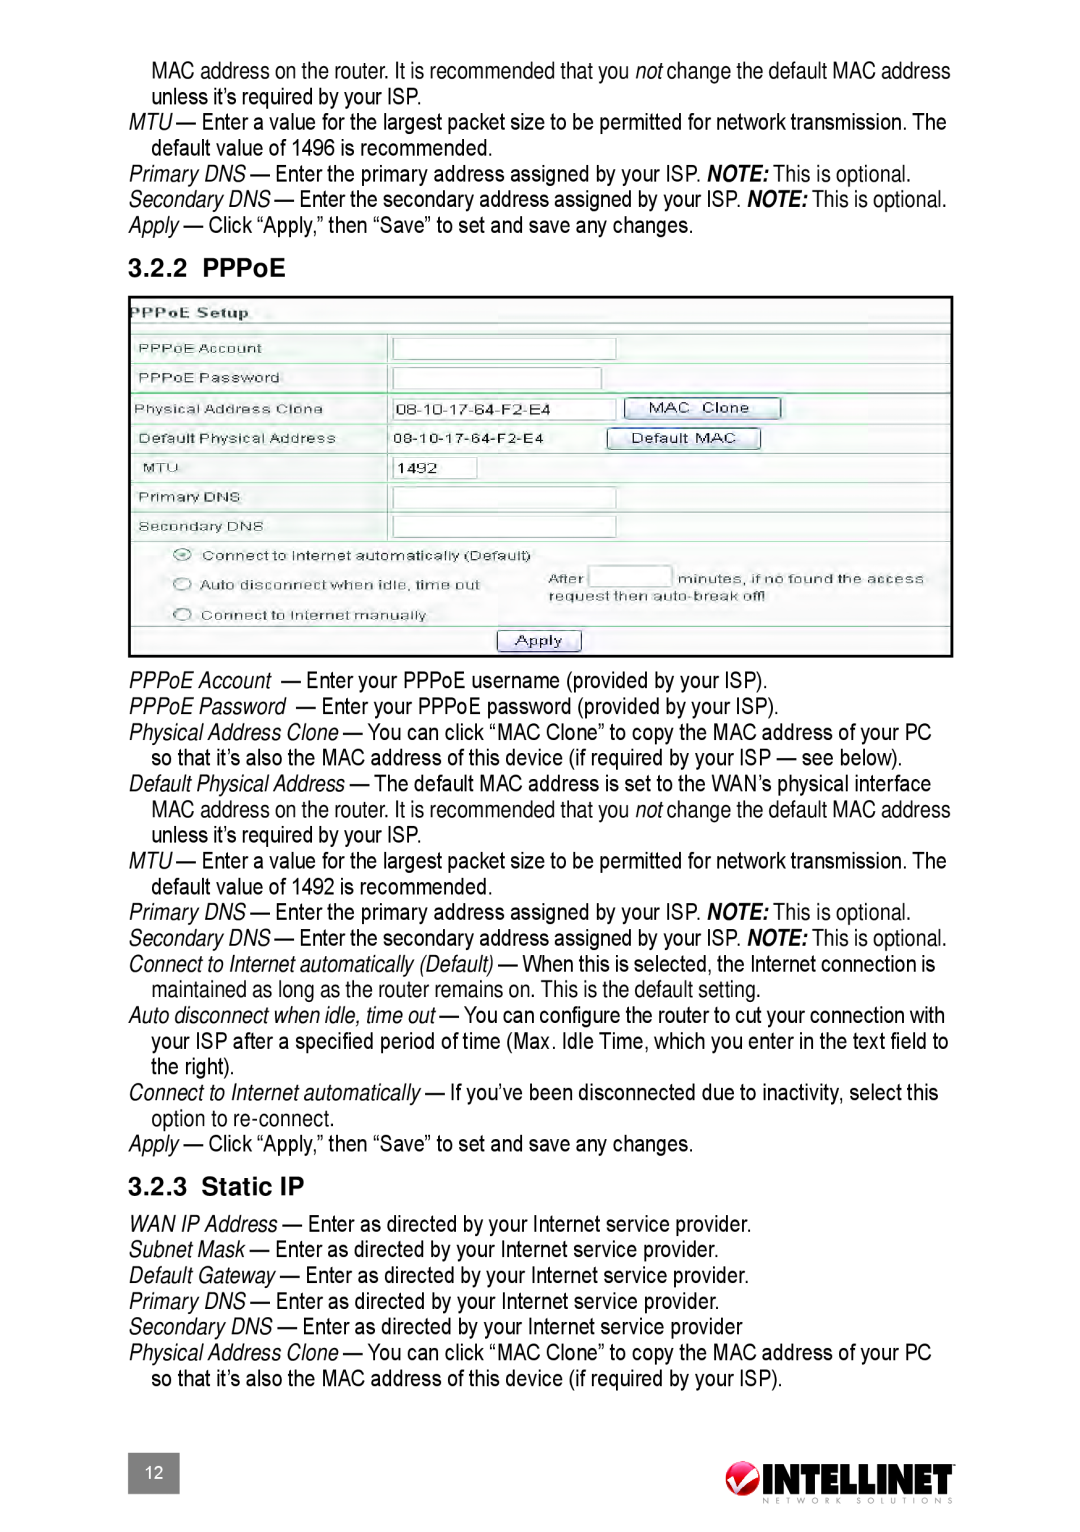 Intellinet Network Solutions 524537 user manual PPPoE, Static IP 